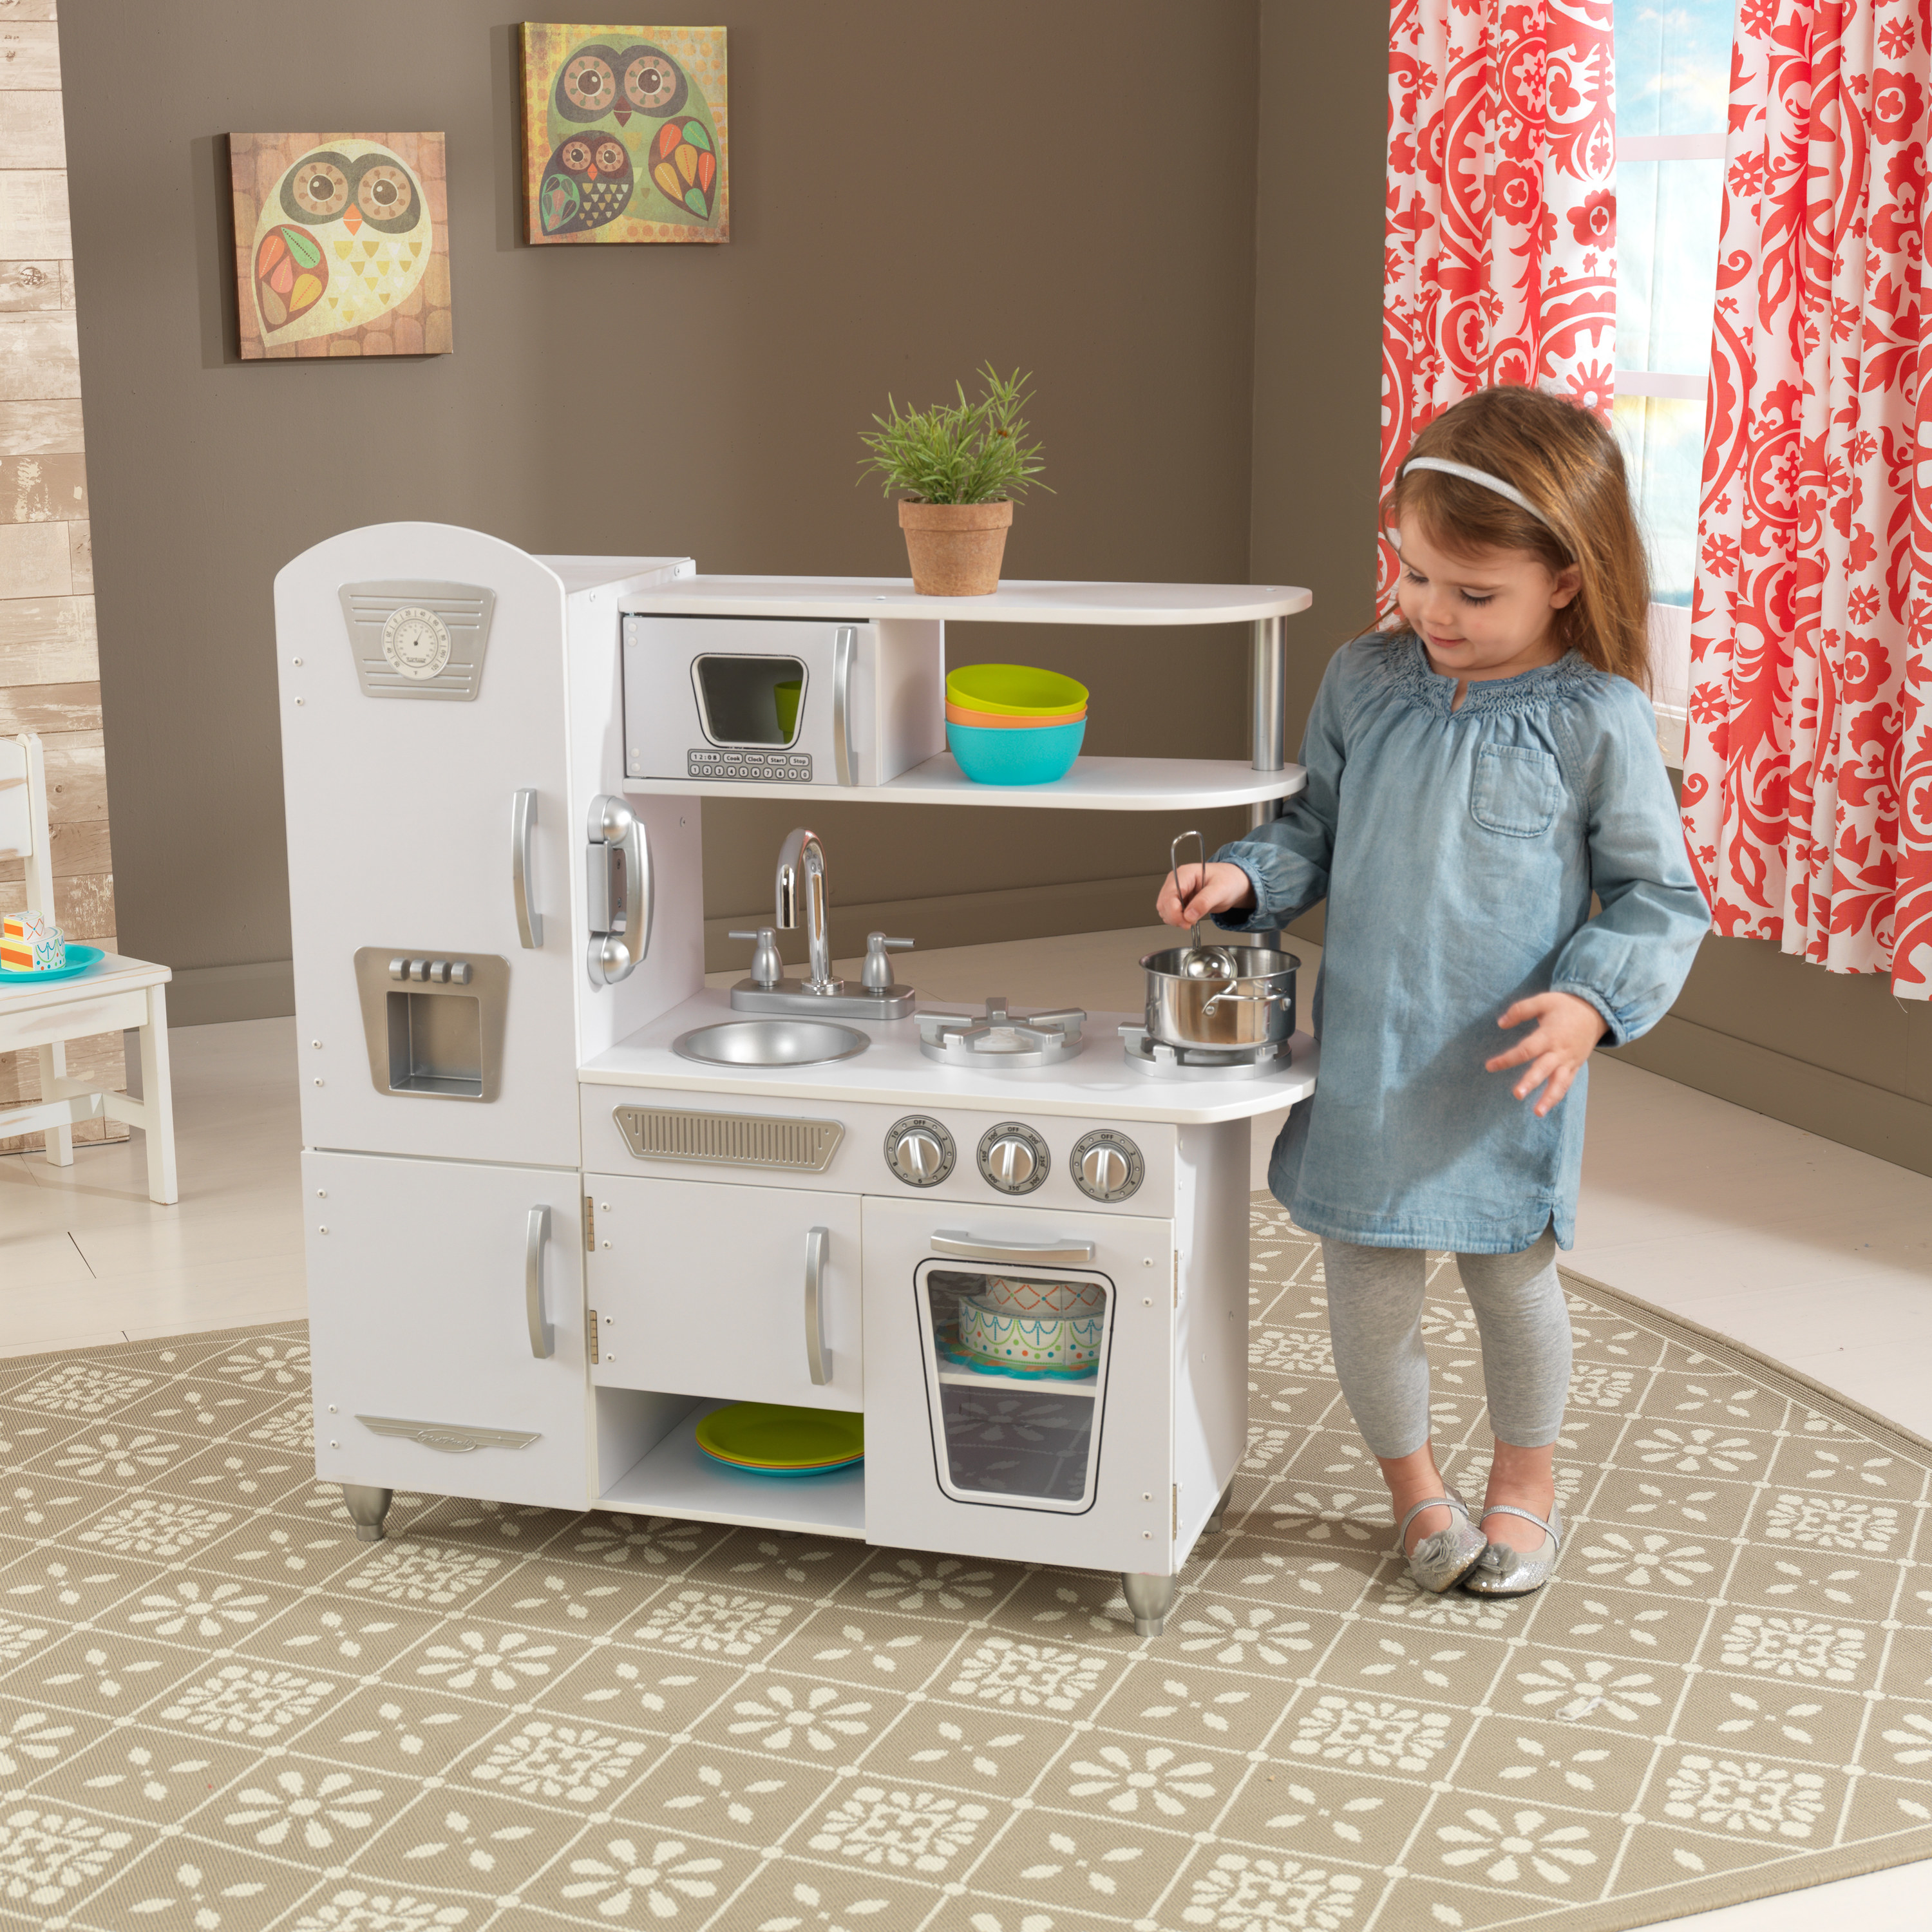 A child playing with the white kitchen